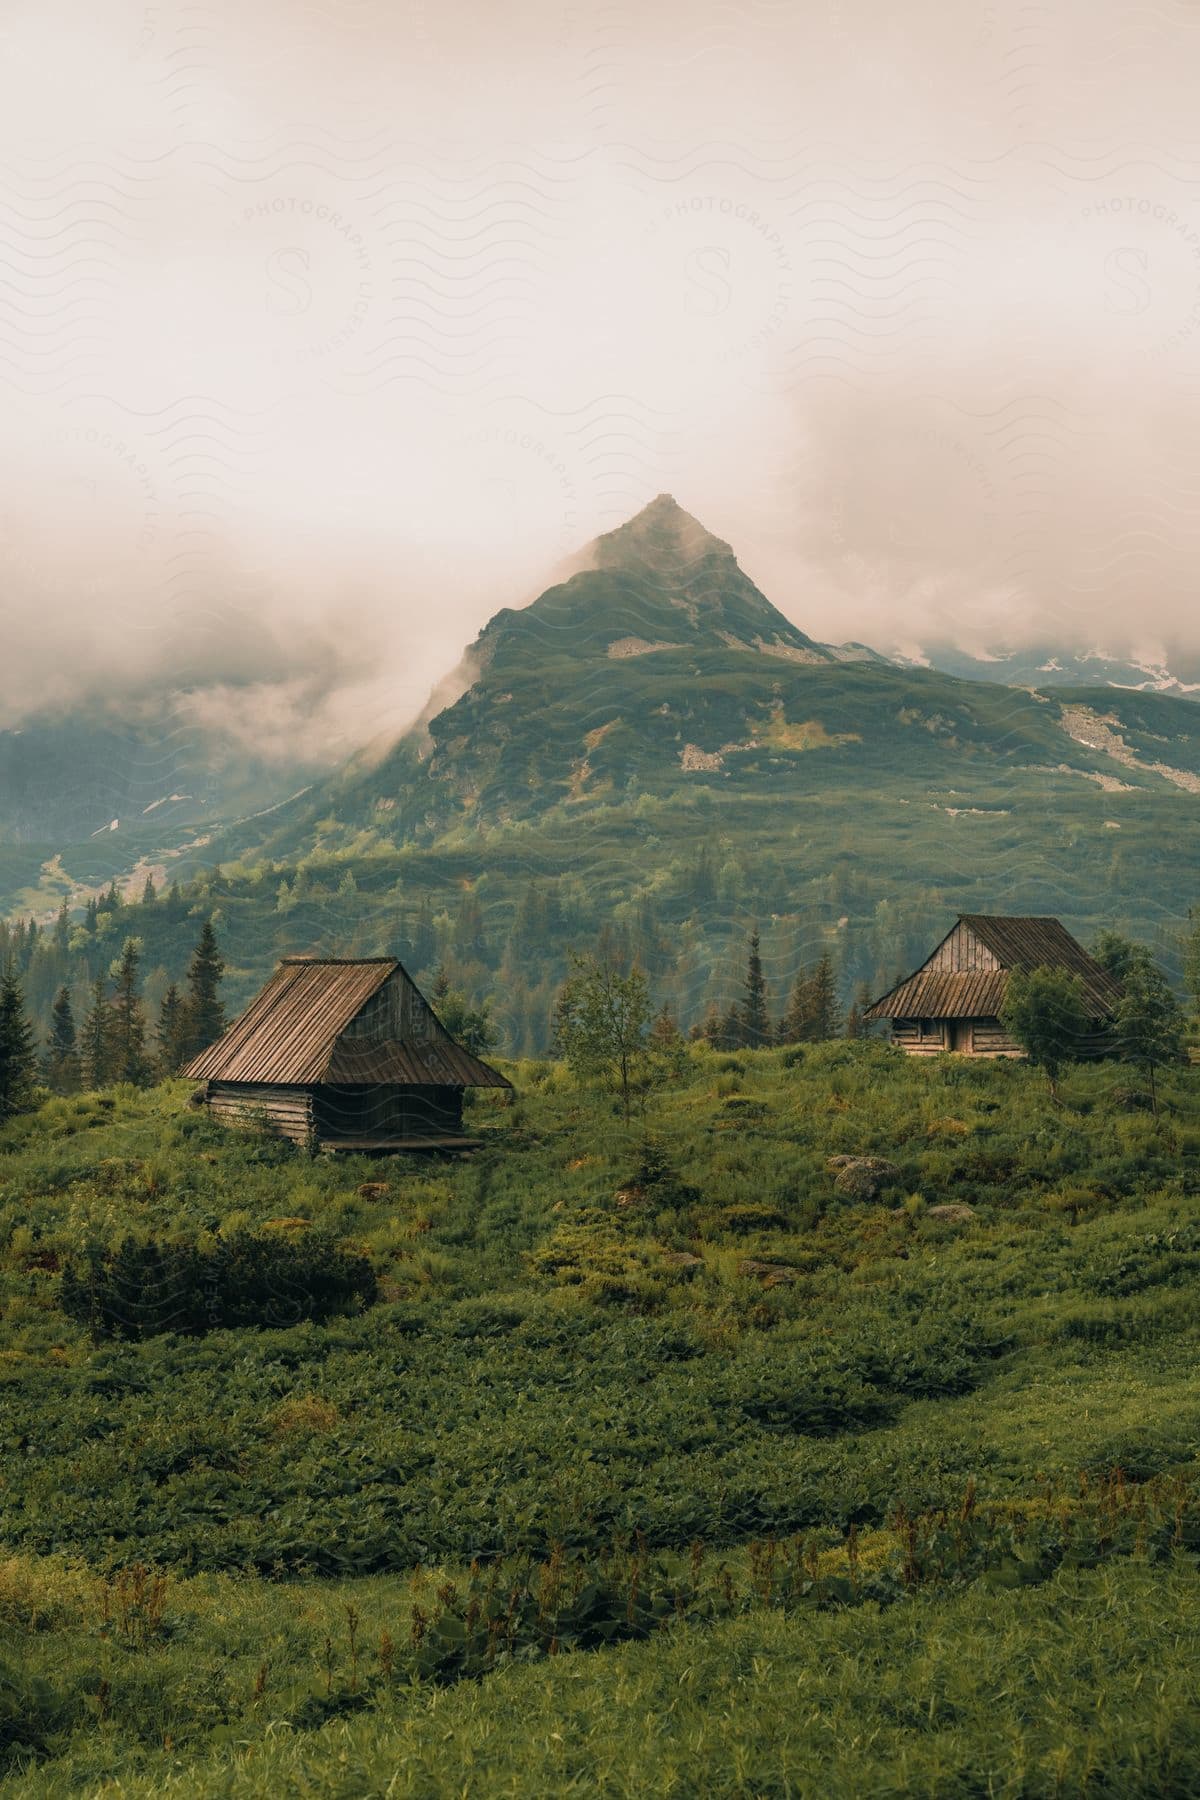 Traditional wooden huts on a lush hillside with a foggy mountain peak in the background.